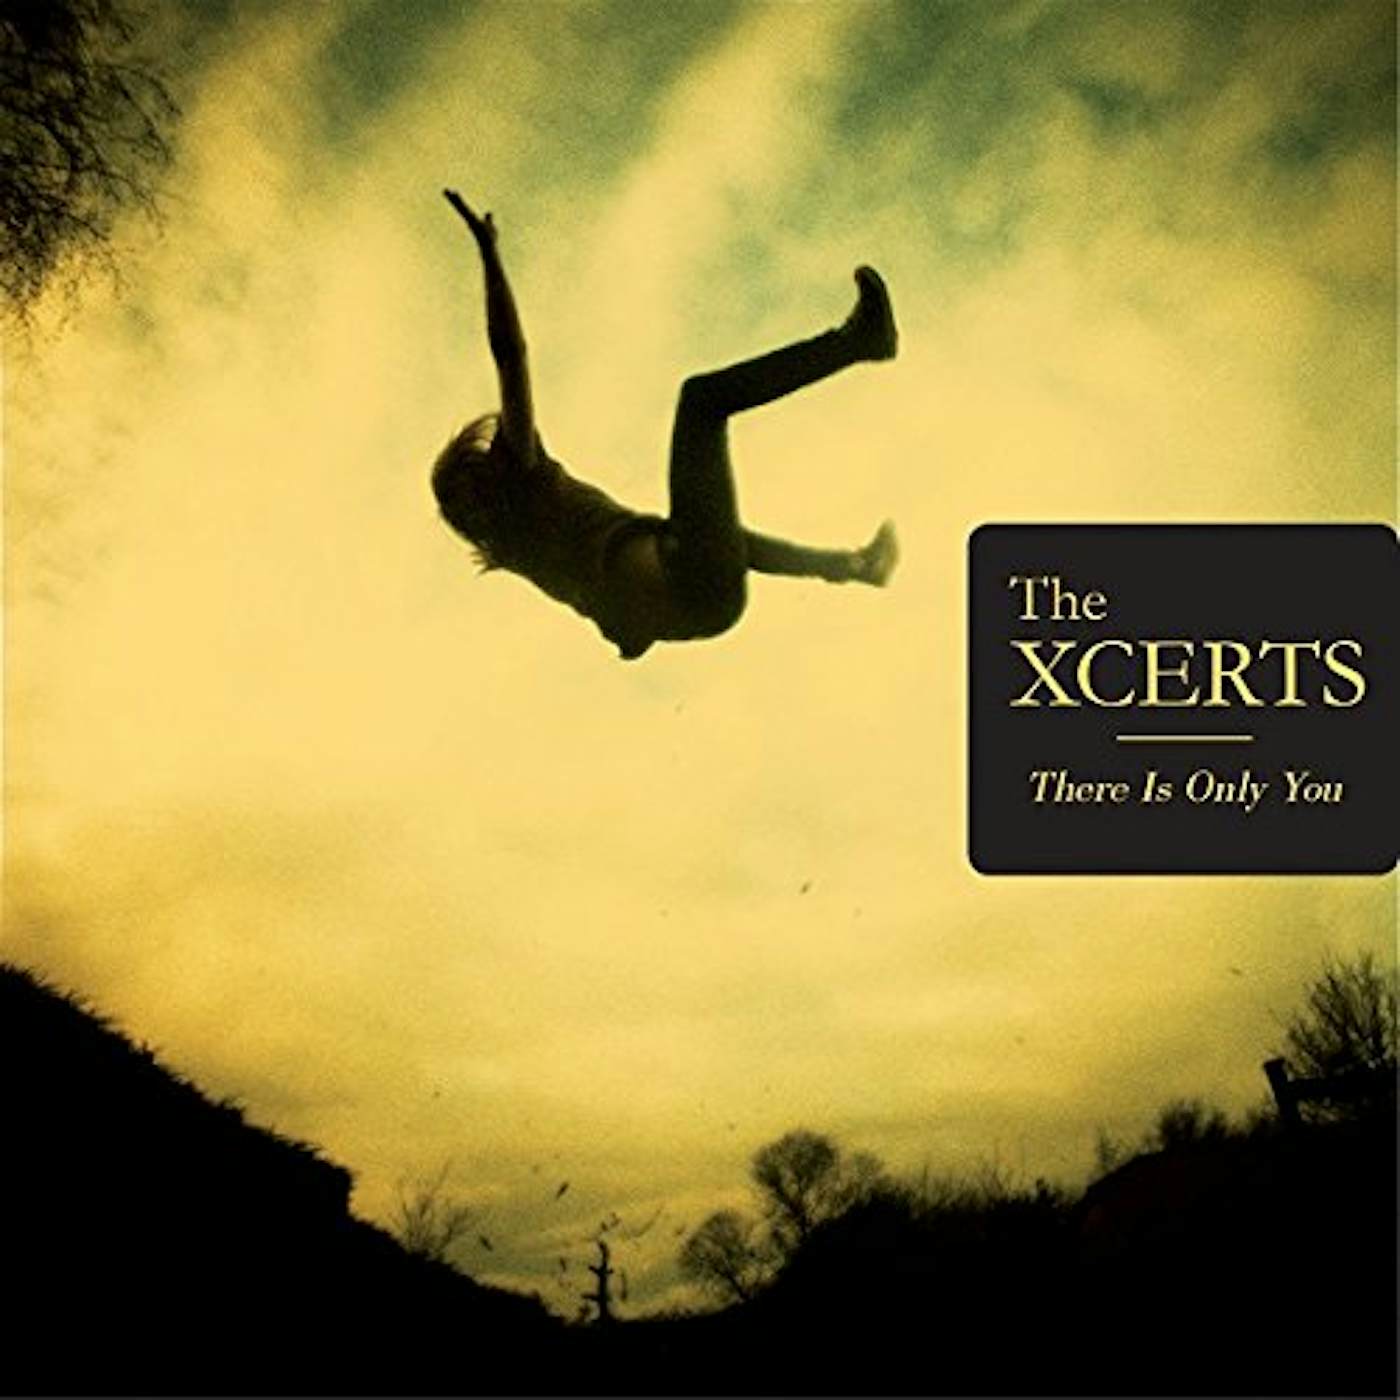 The XCERTS THERE IS ONLY YOU CD